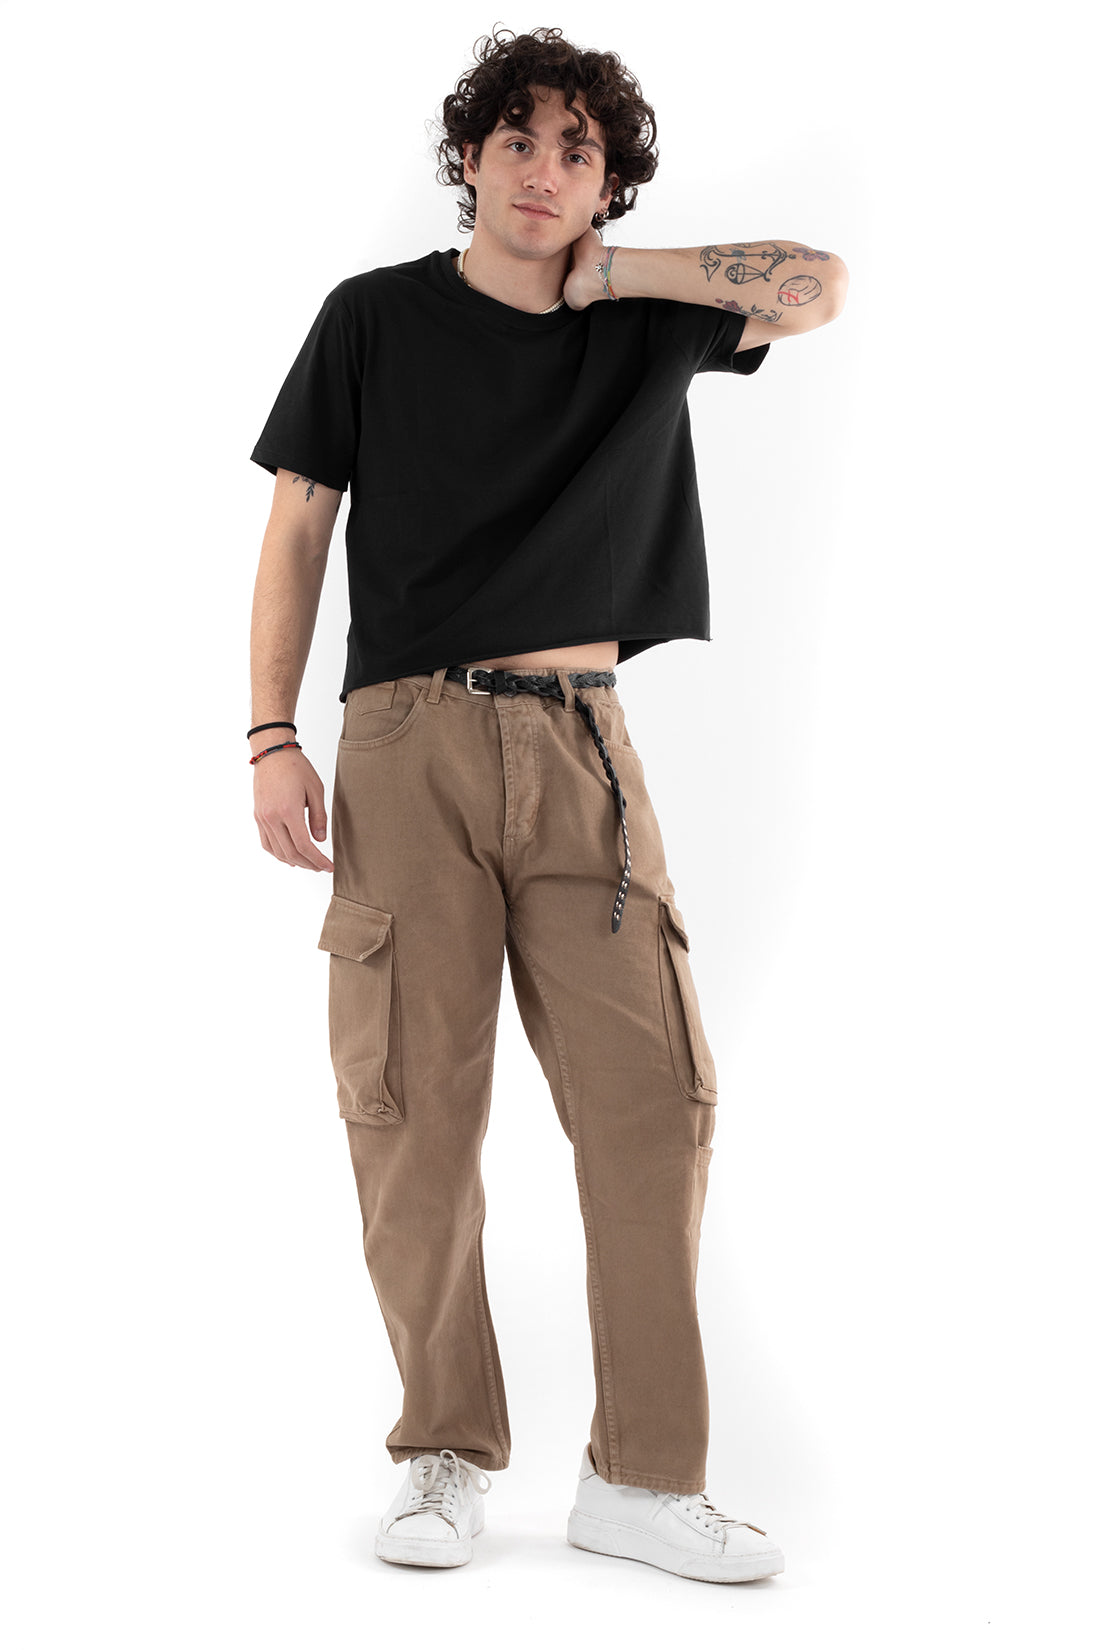 Men's Cropped T-shirt Solid Color Black Boxy Fit Short Sleeve Casual Raw Cut GIOSAL-TS2854A